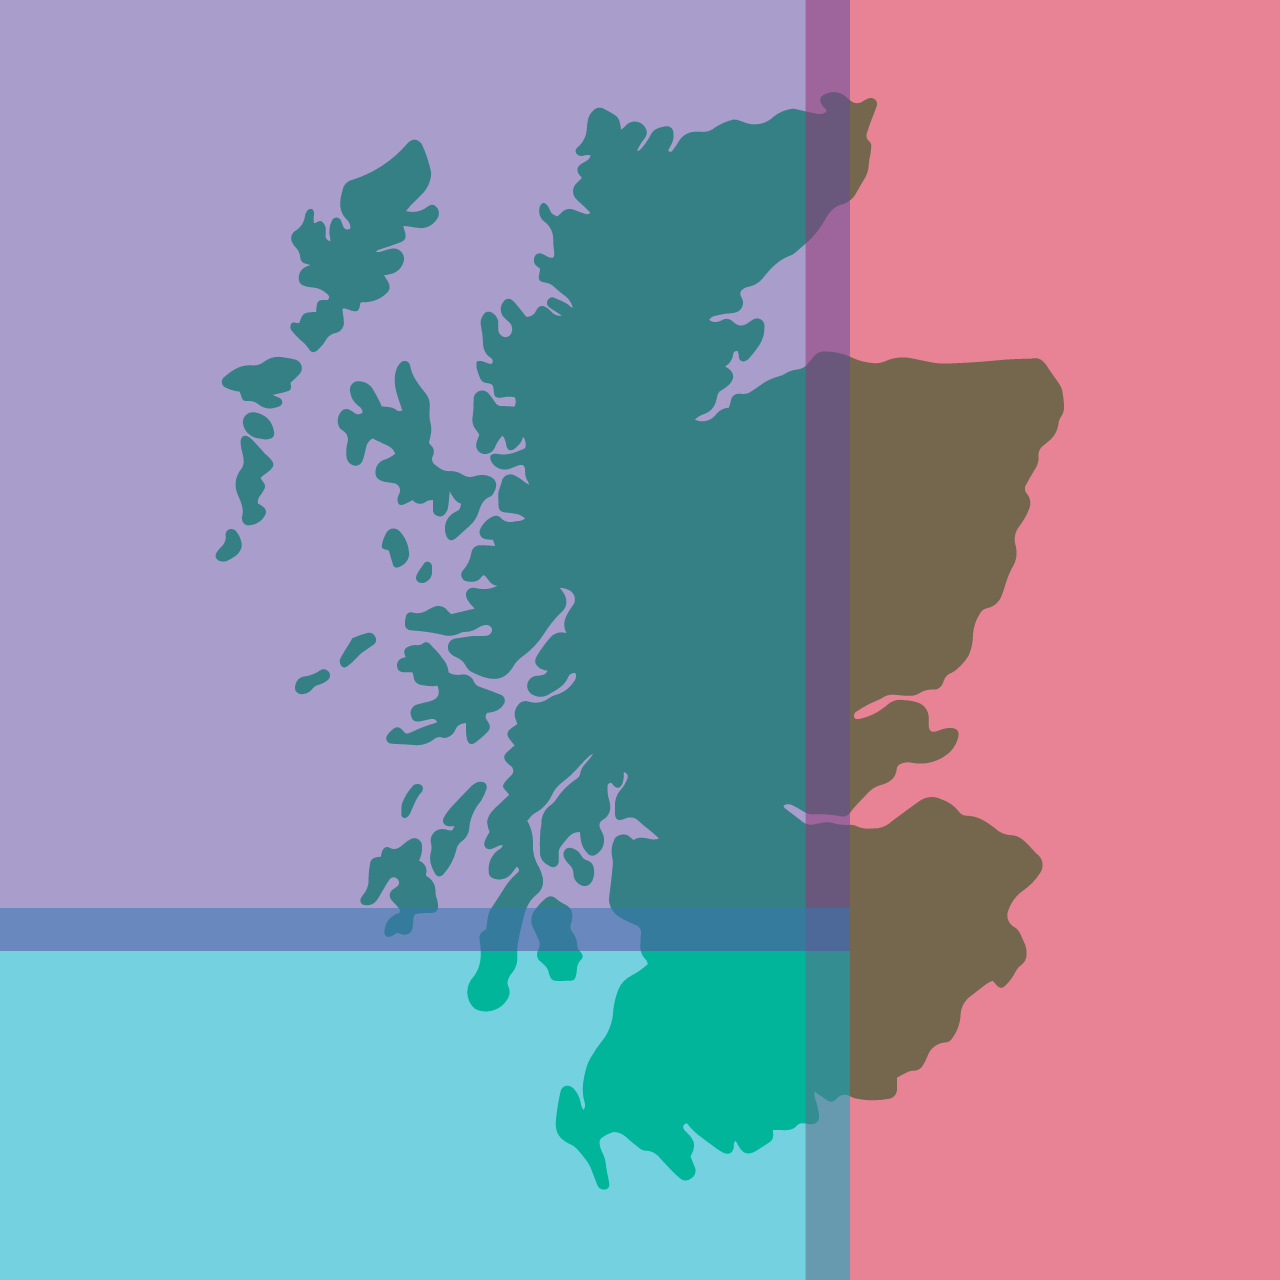 A map representation of Scotland overlaid with the library colors